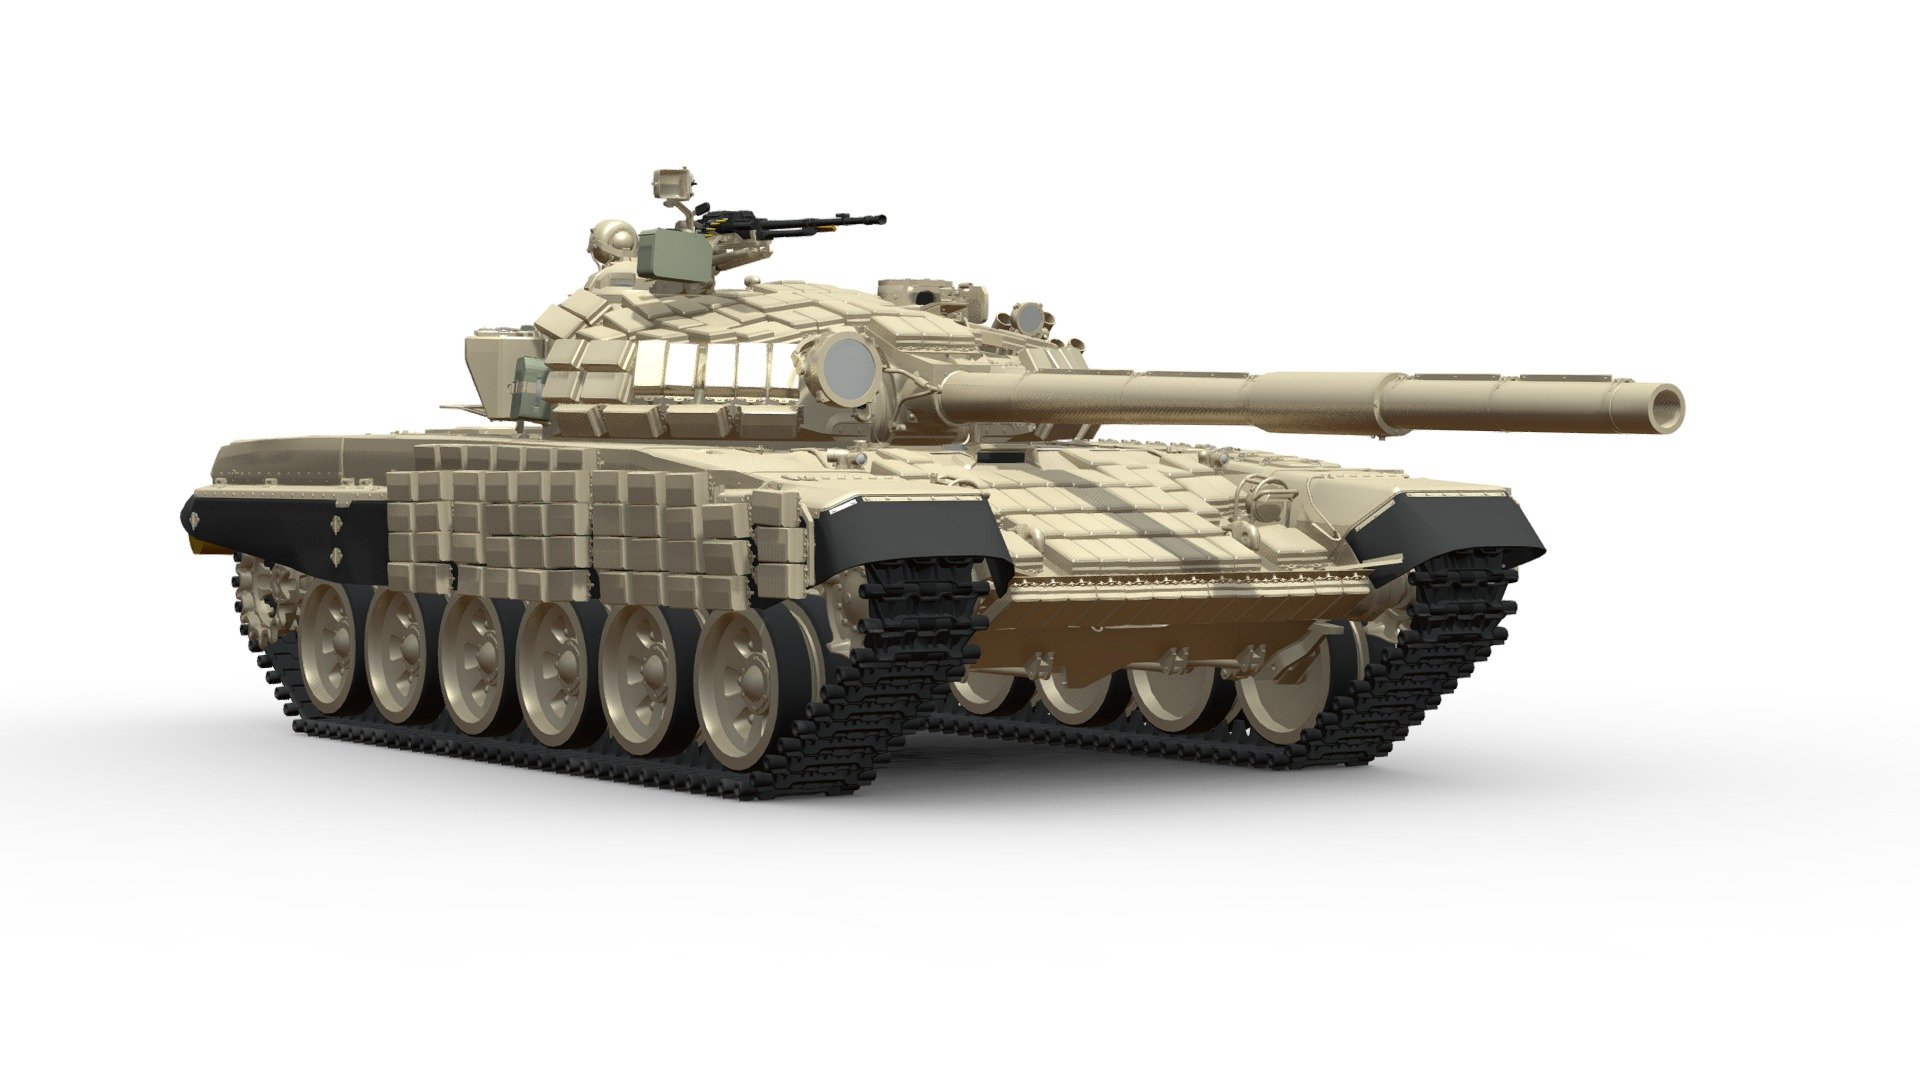 This high-quality 3D model is a detailed representation of the T-72B tank, a Soviet-designed main battle tank that has seen extensive use in various conflicts around the world. The model features accurate proportions, intricate surface detailing, and is optimized for use in simulations, games, or visualizations 3d model